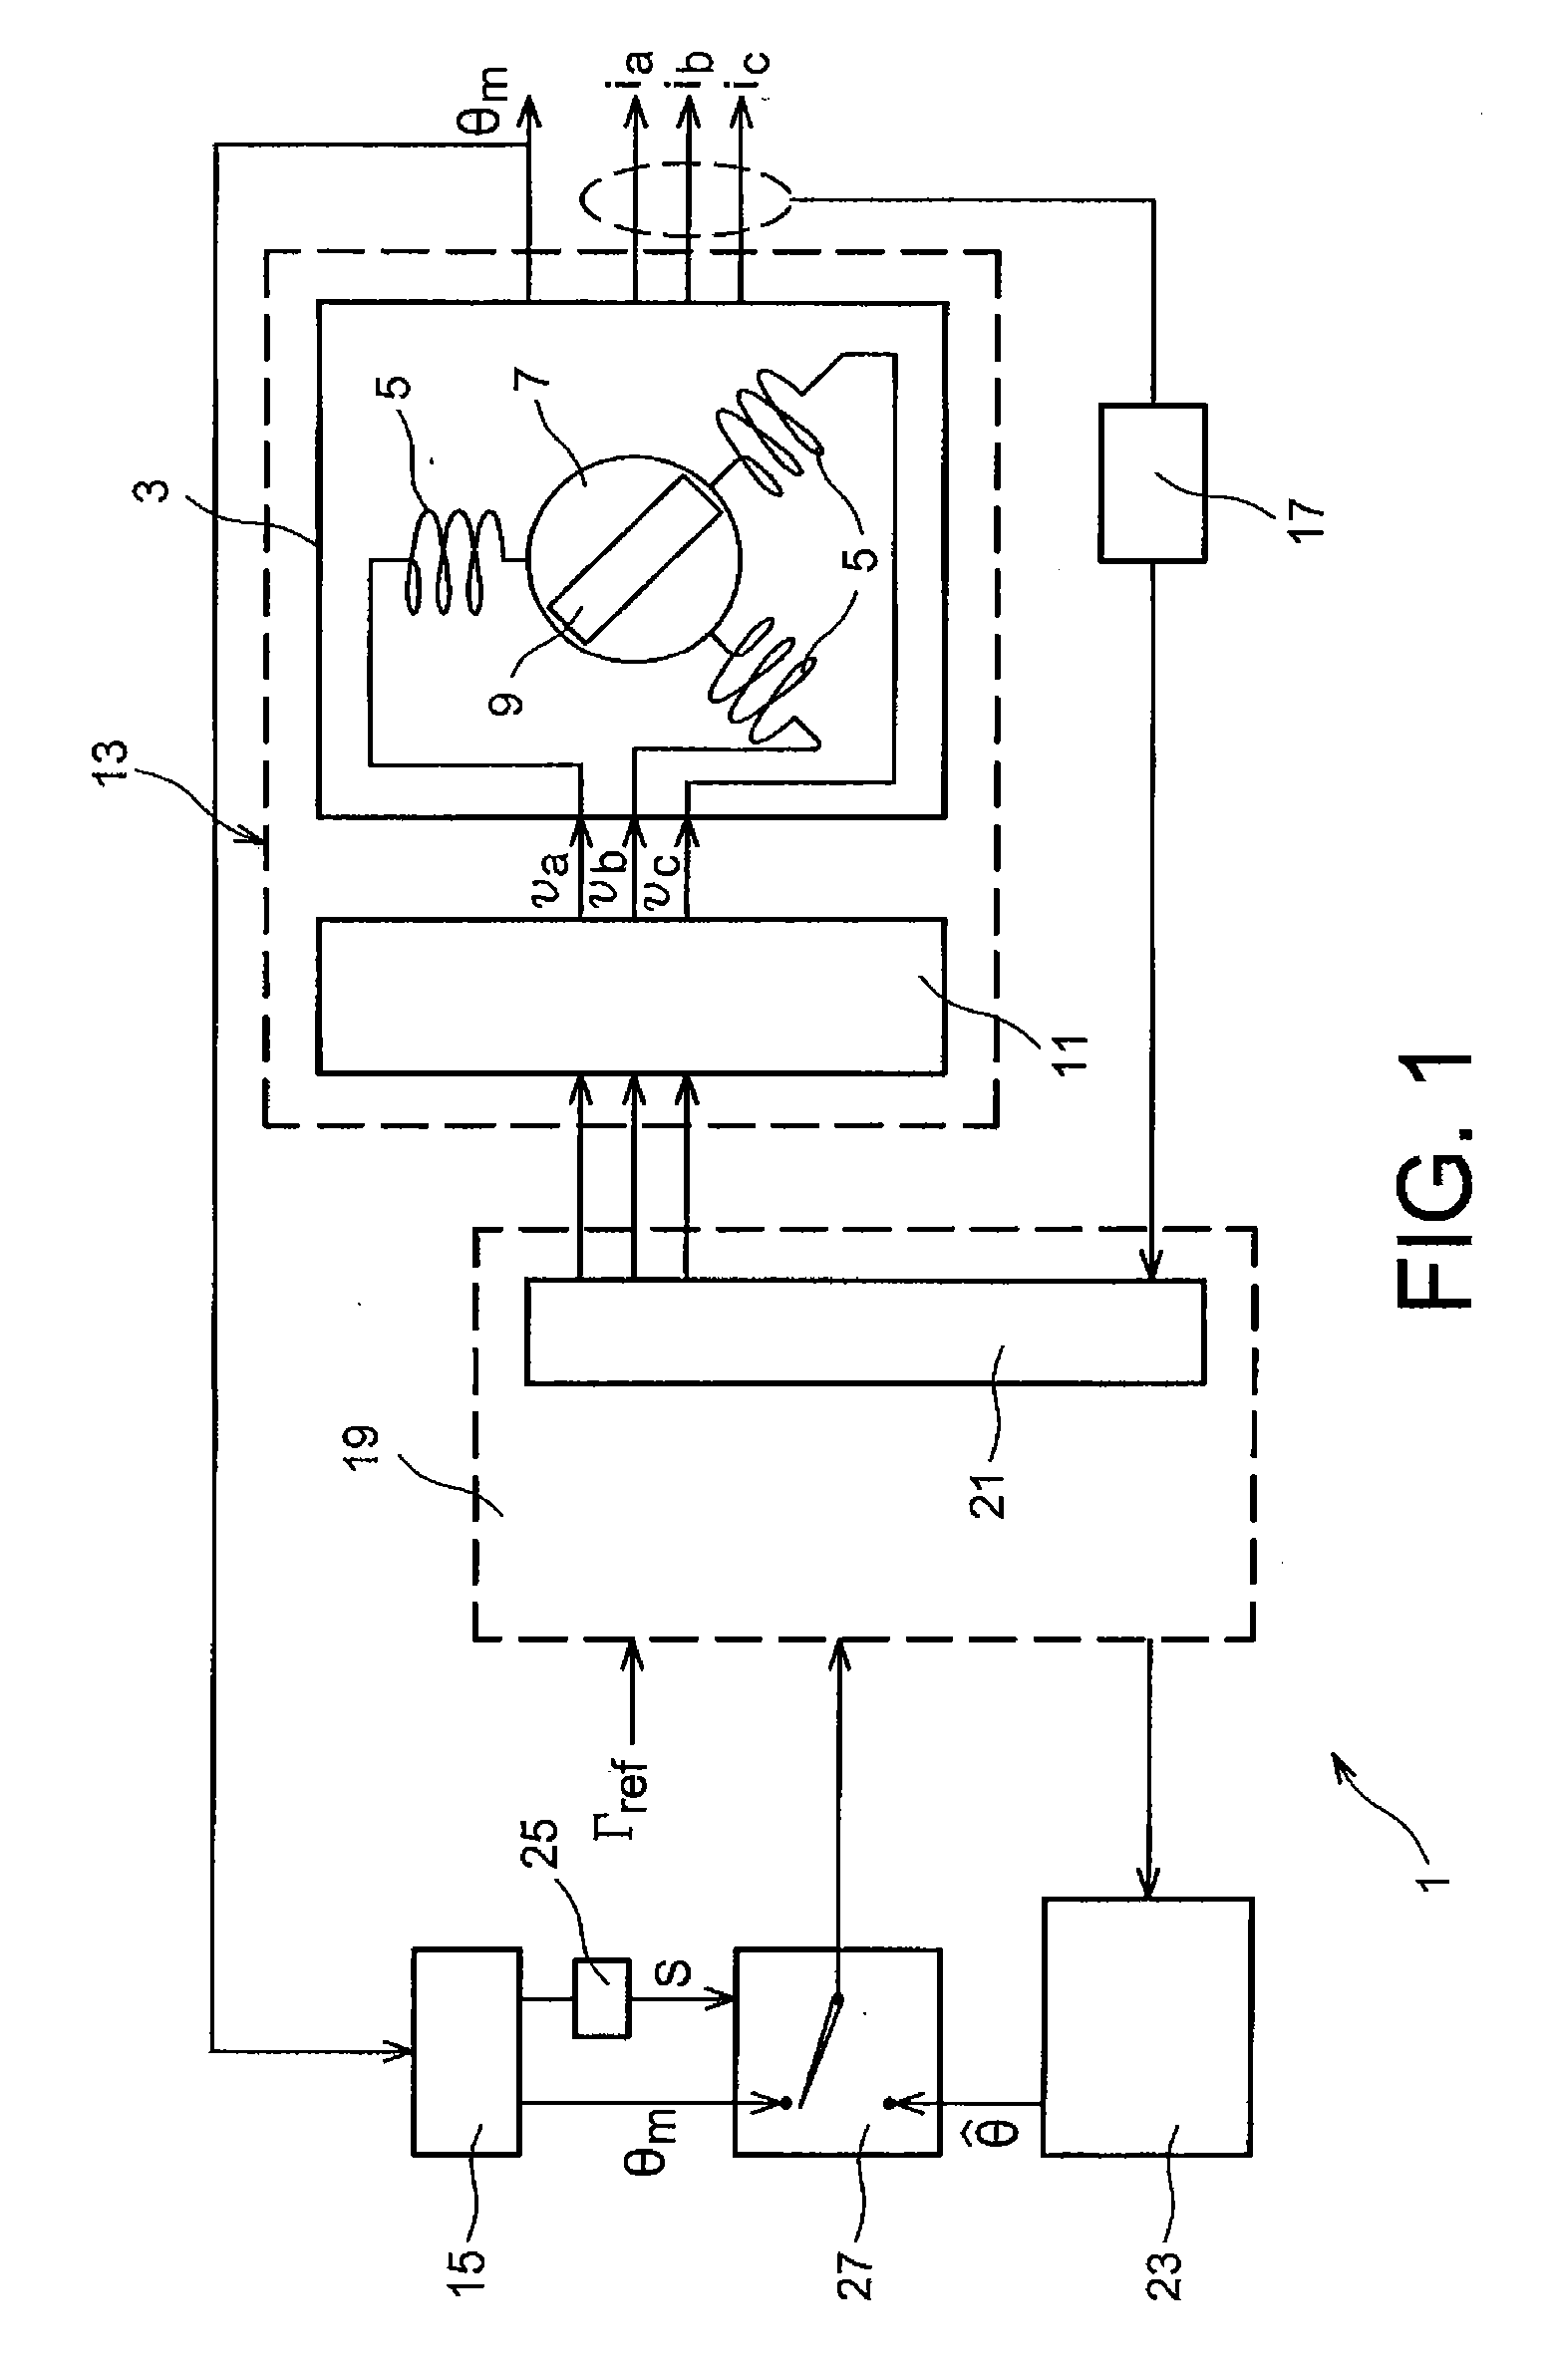 Device for control of a pmsm